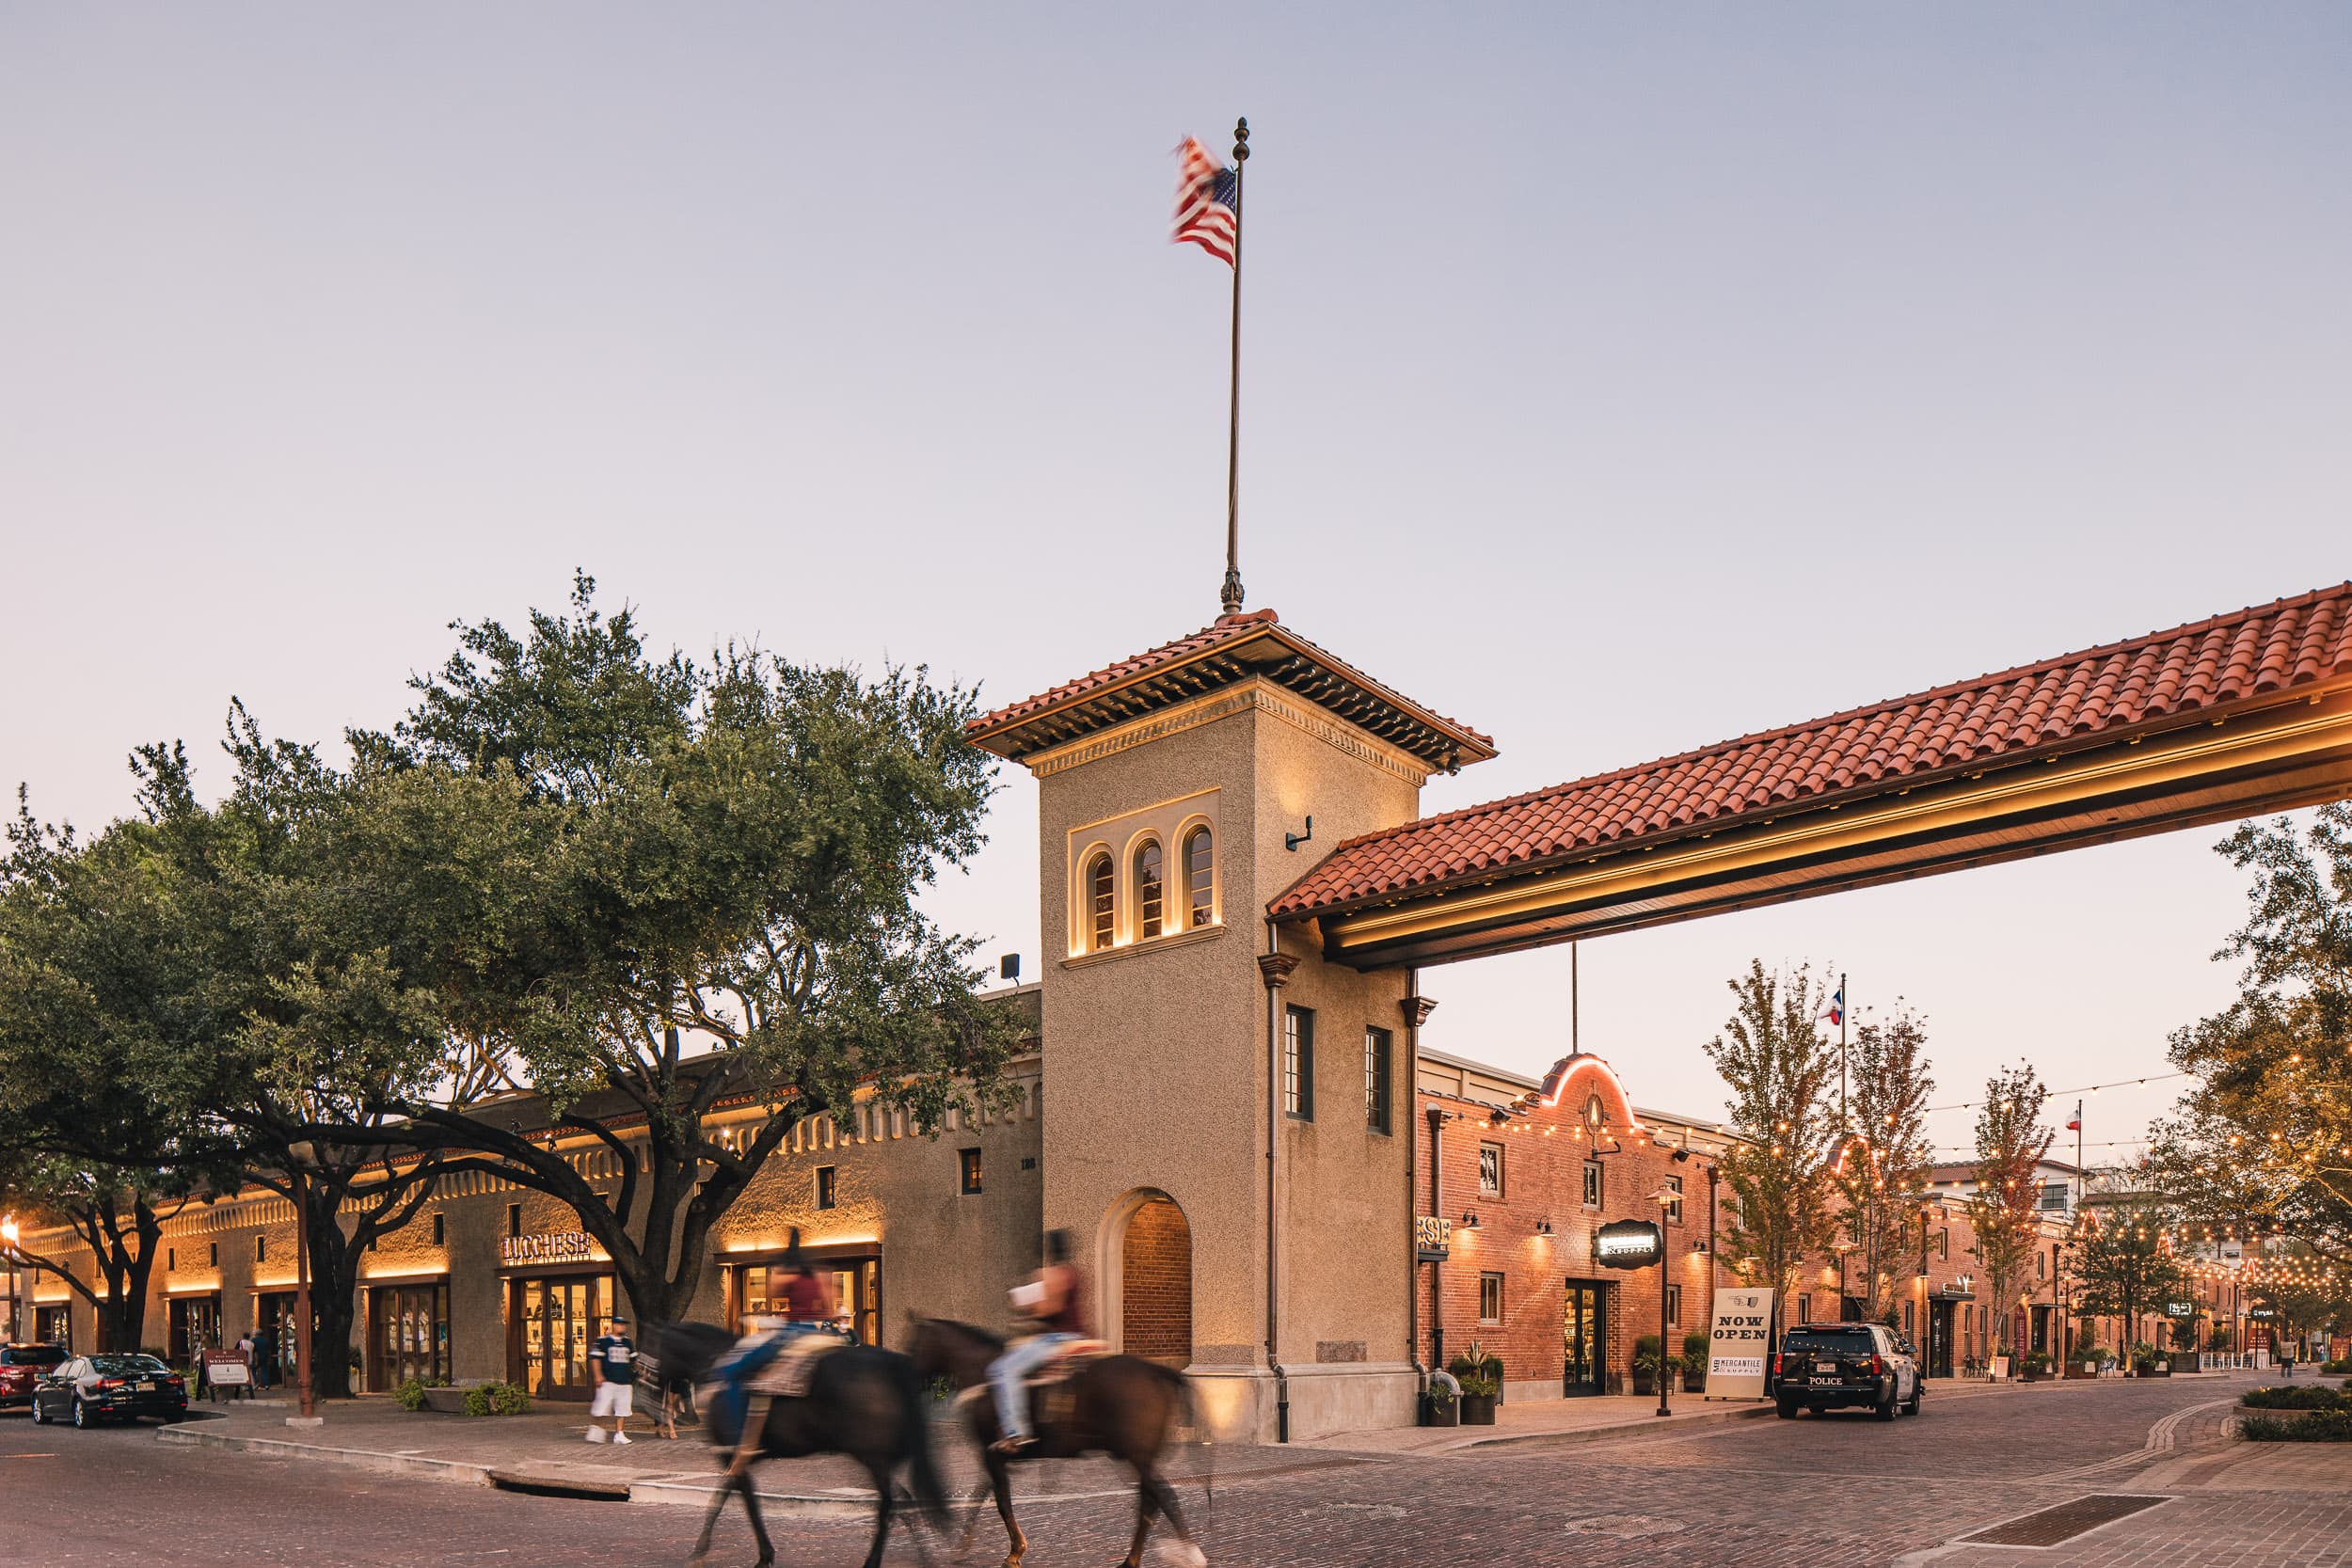 Fort Worth Stockyards Horse and Mule Barn